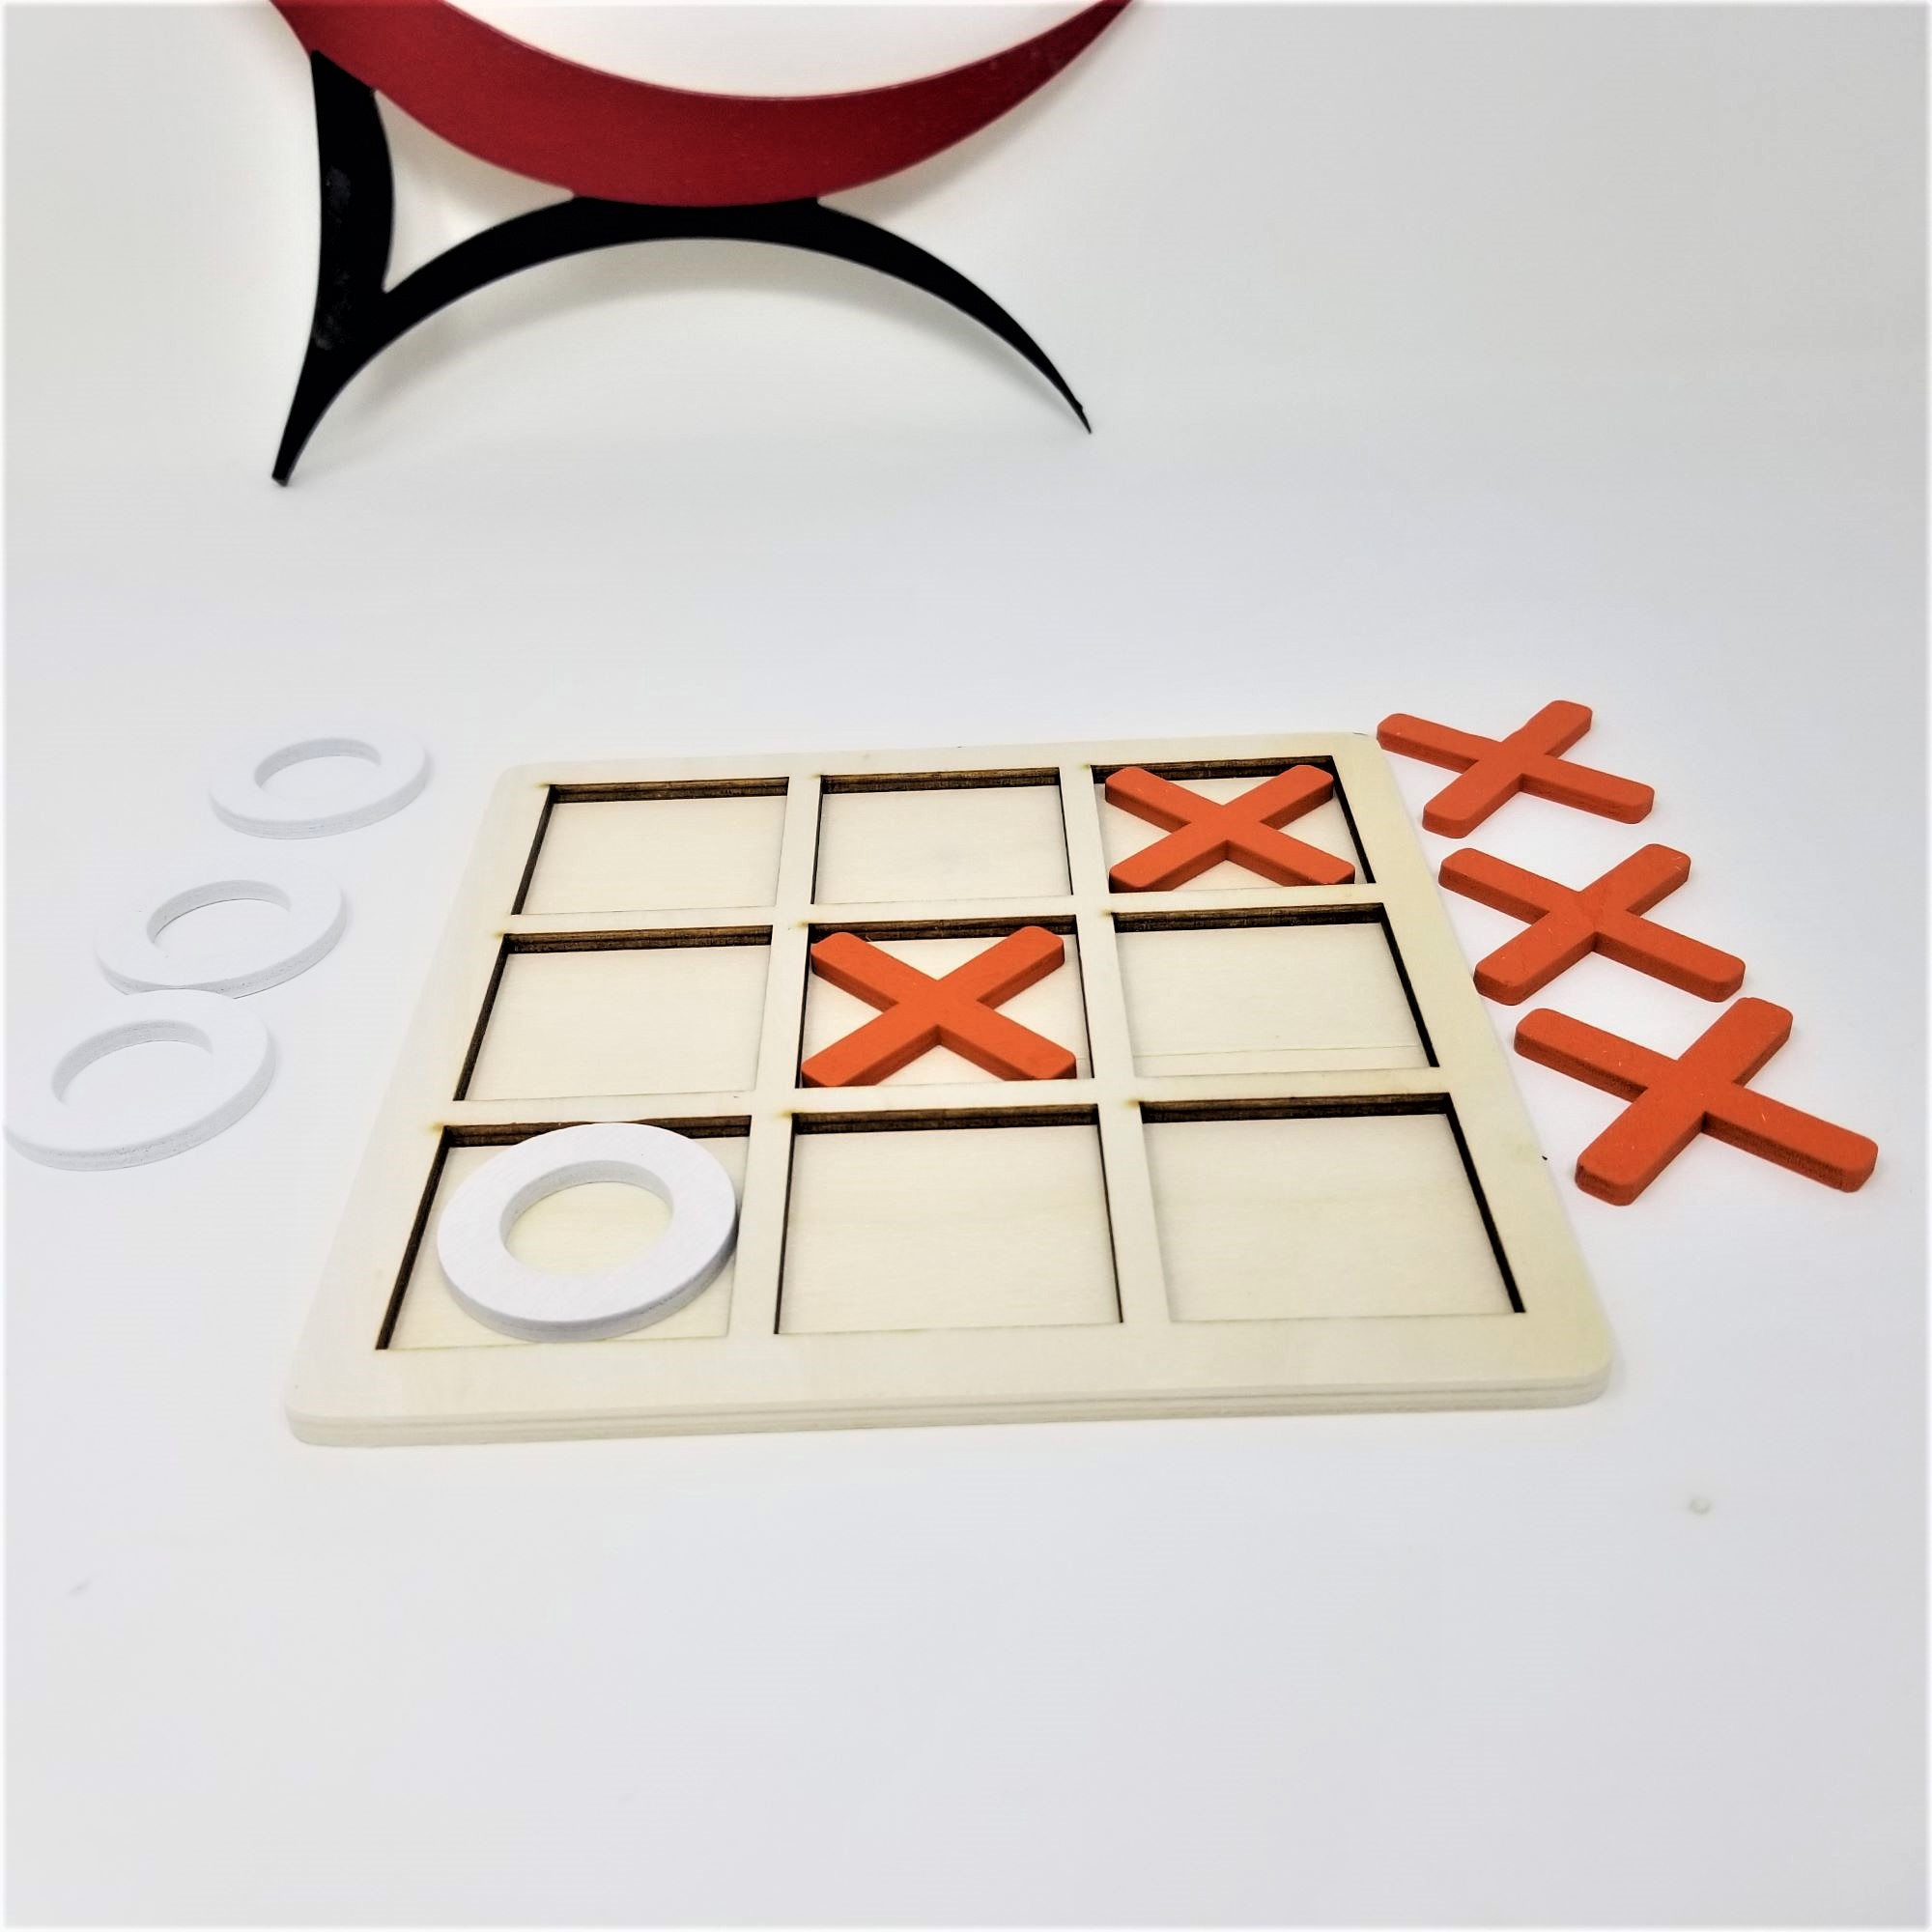 Printed Wooden Puzzle - Tic Tac Toe, Noughts and Crosses (5x5